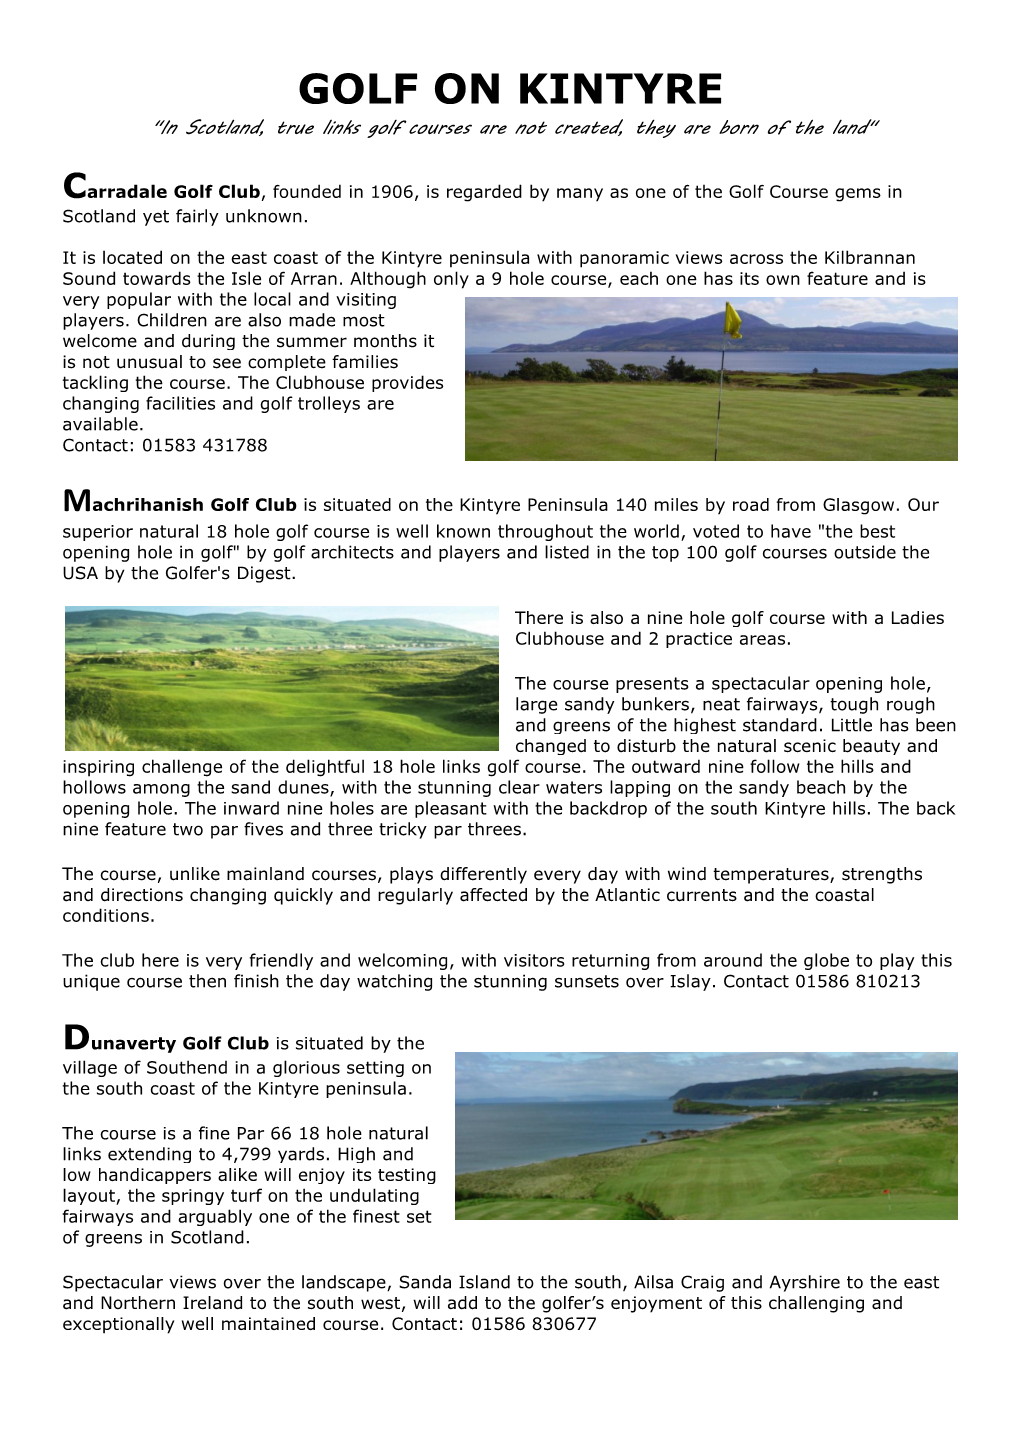 GOLF on KINTYRE "In Scotland, True Links Golf Courses Are Not Created, They Are Born of the Land"